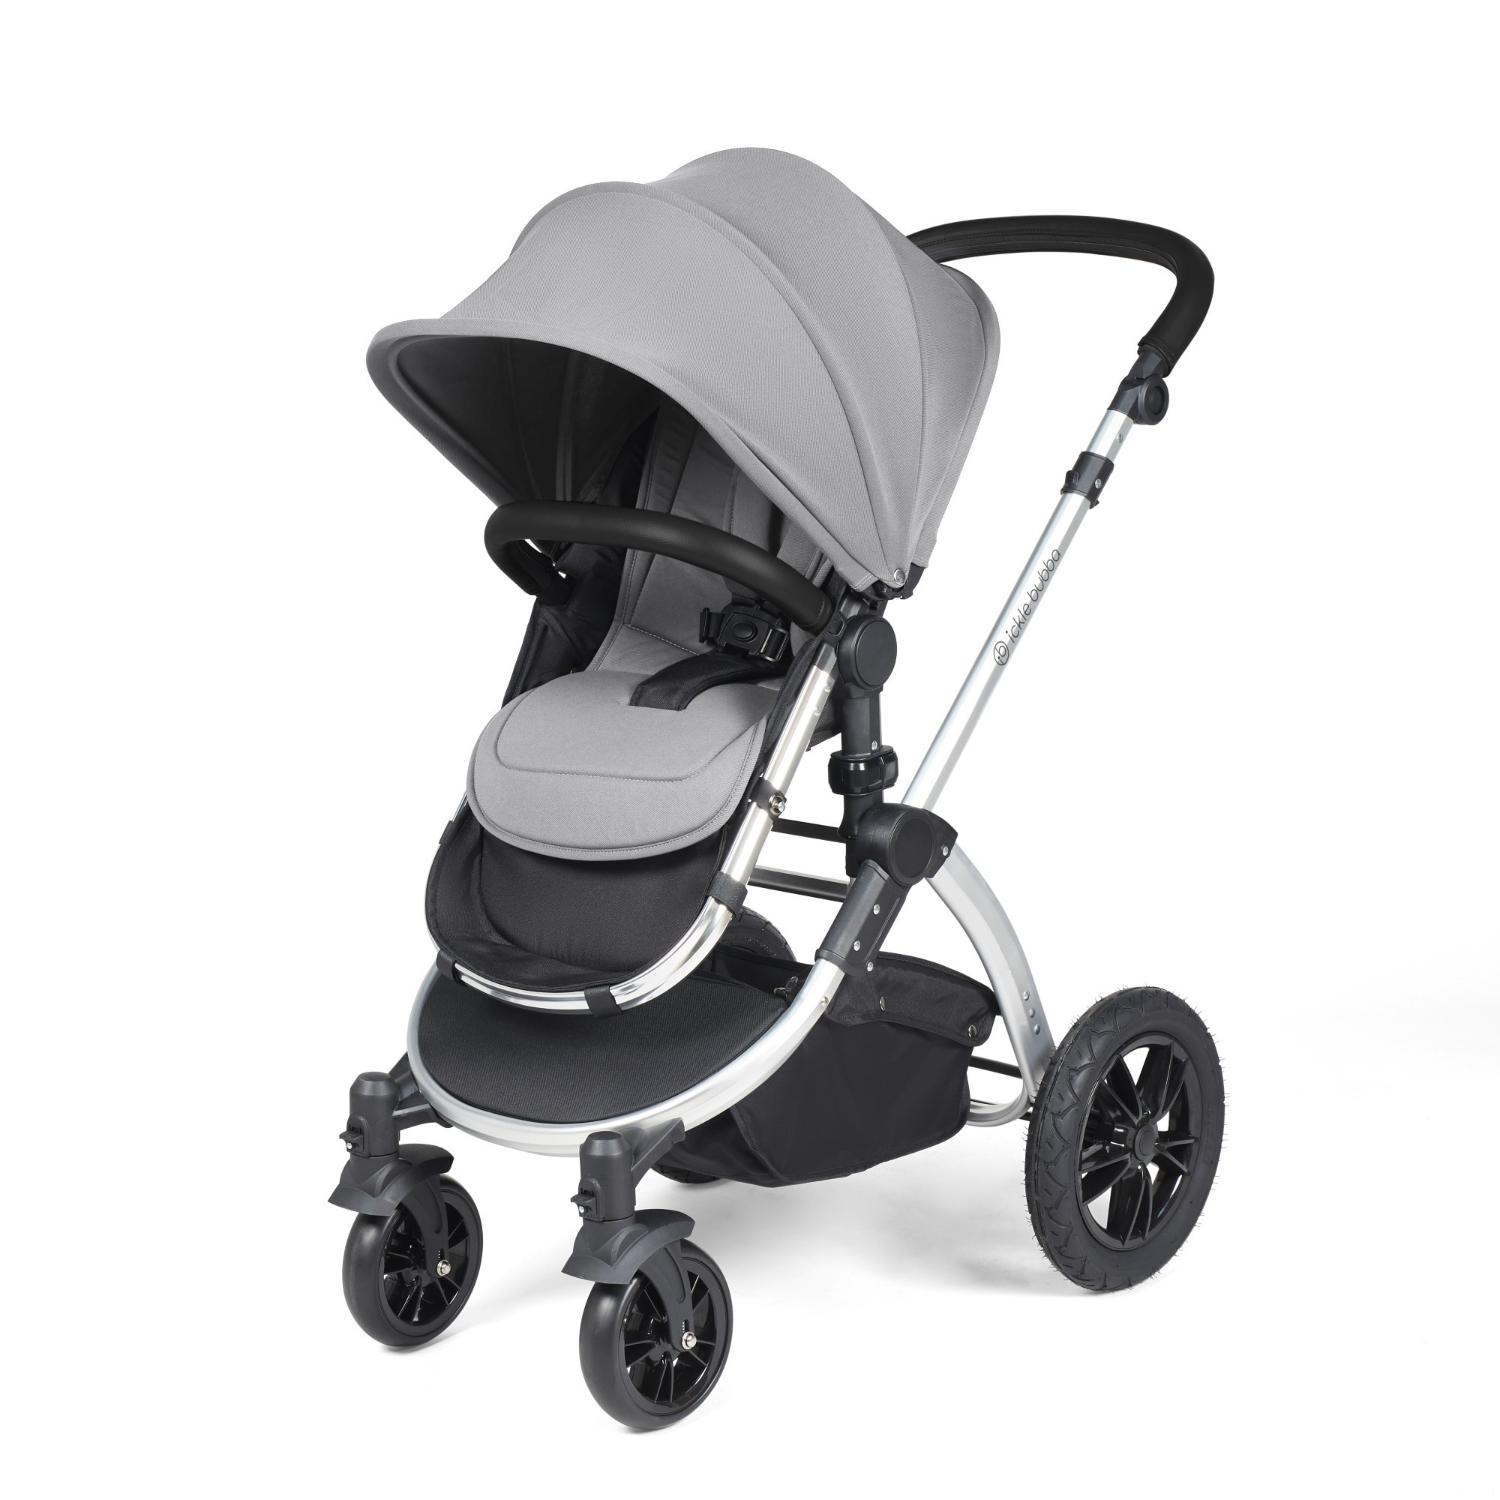 Ickle Bubba Stomp Luxe Pushchair with seat unit attached in Pearl Grey colour with silver chassis